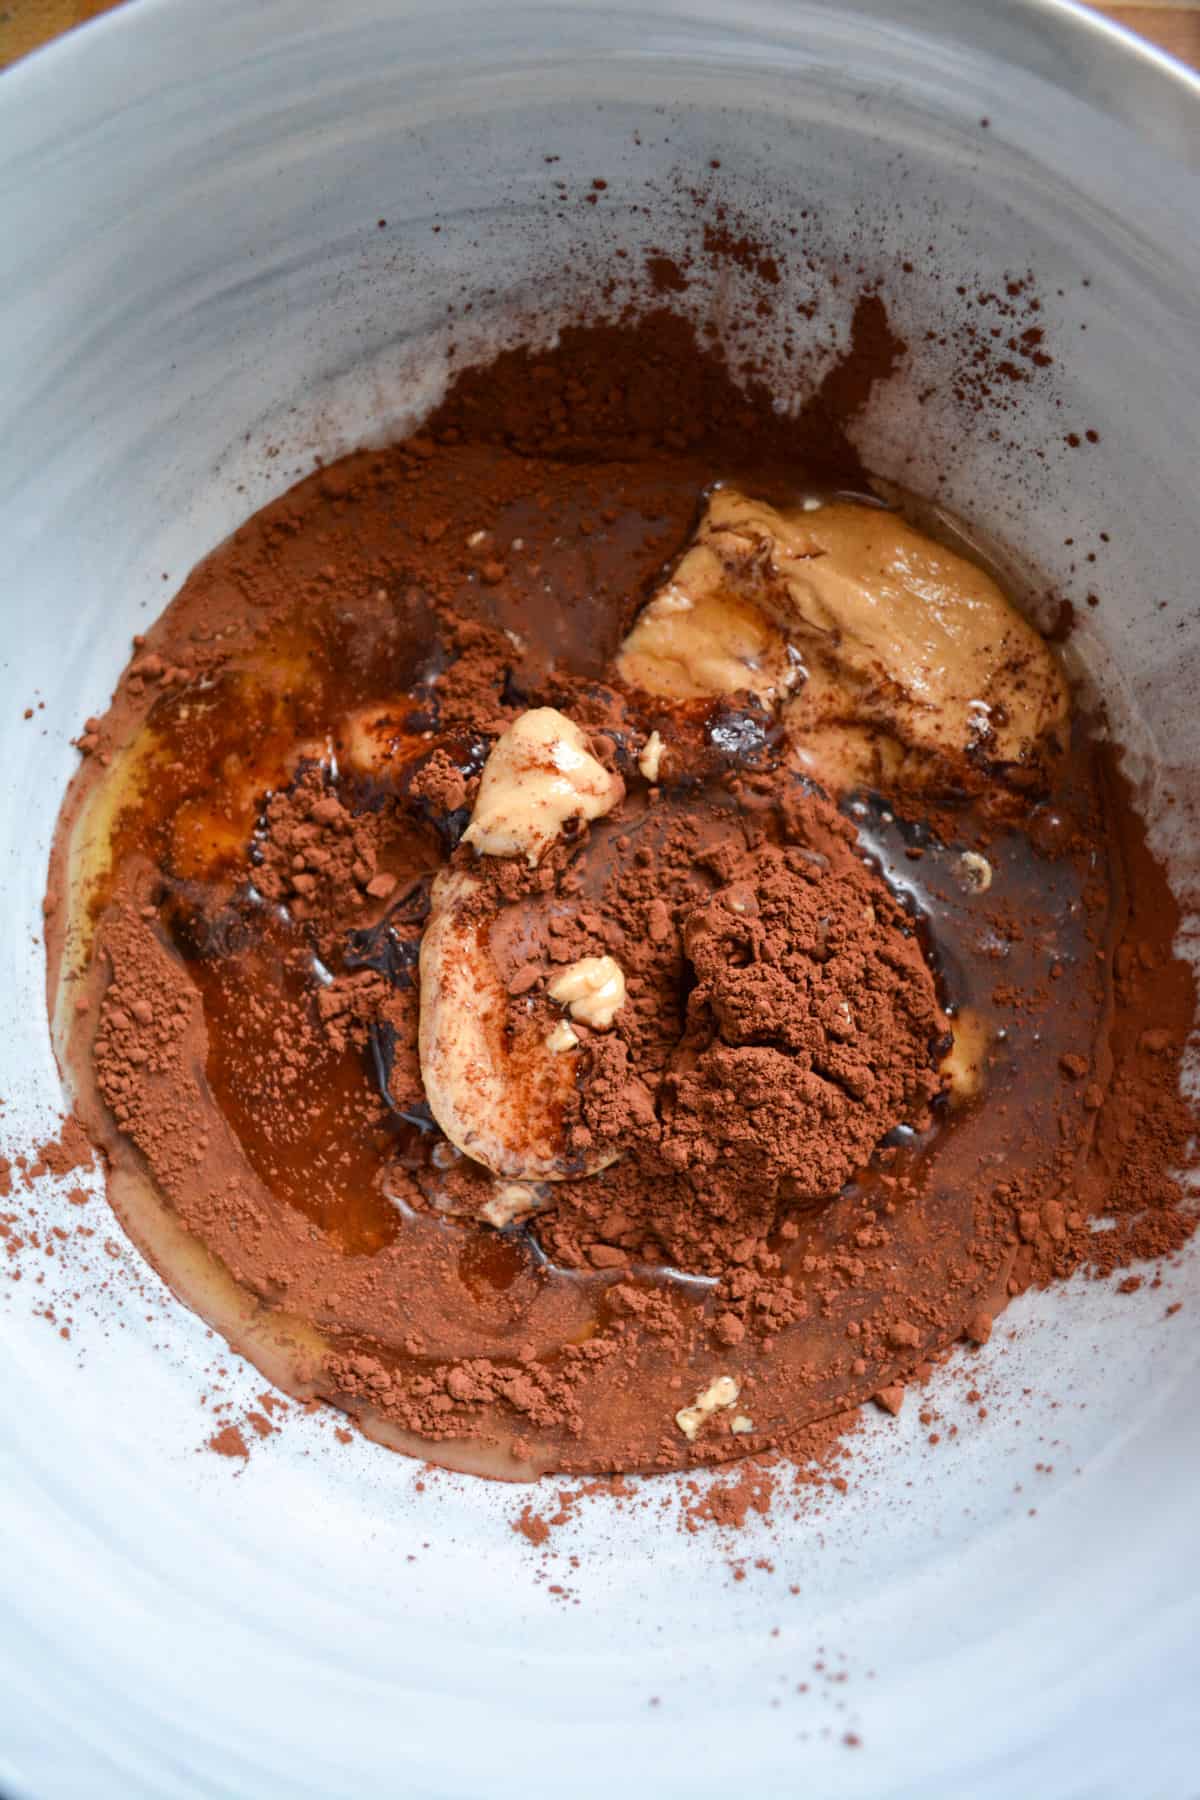 Agave, cocoa powder and peanut butter in a mixing bowl.